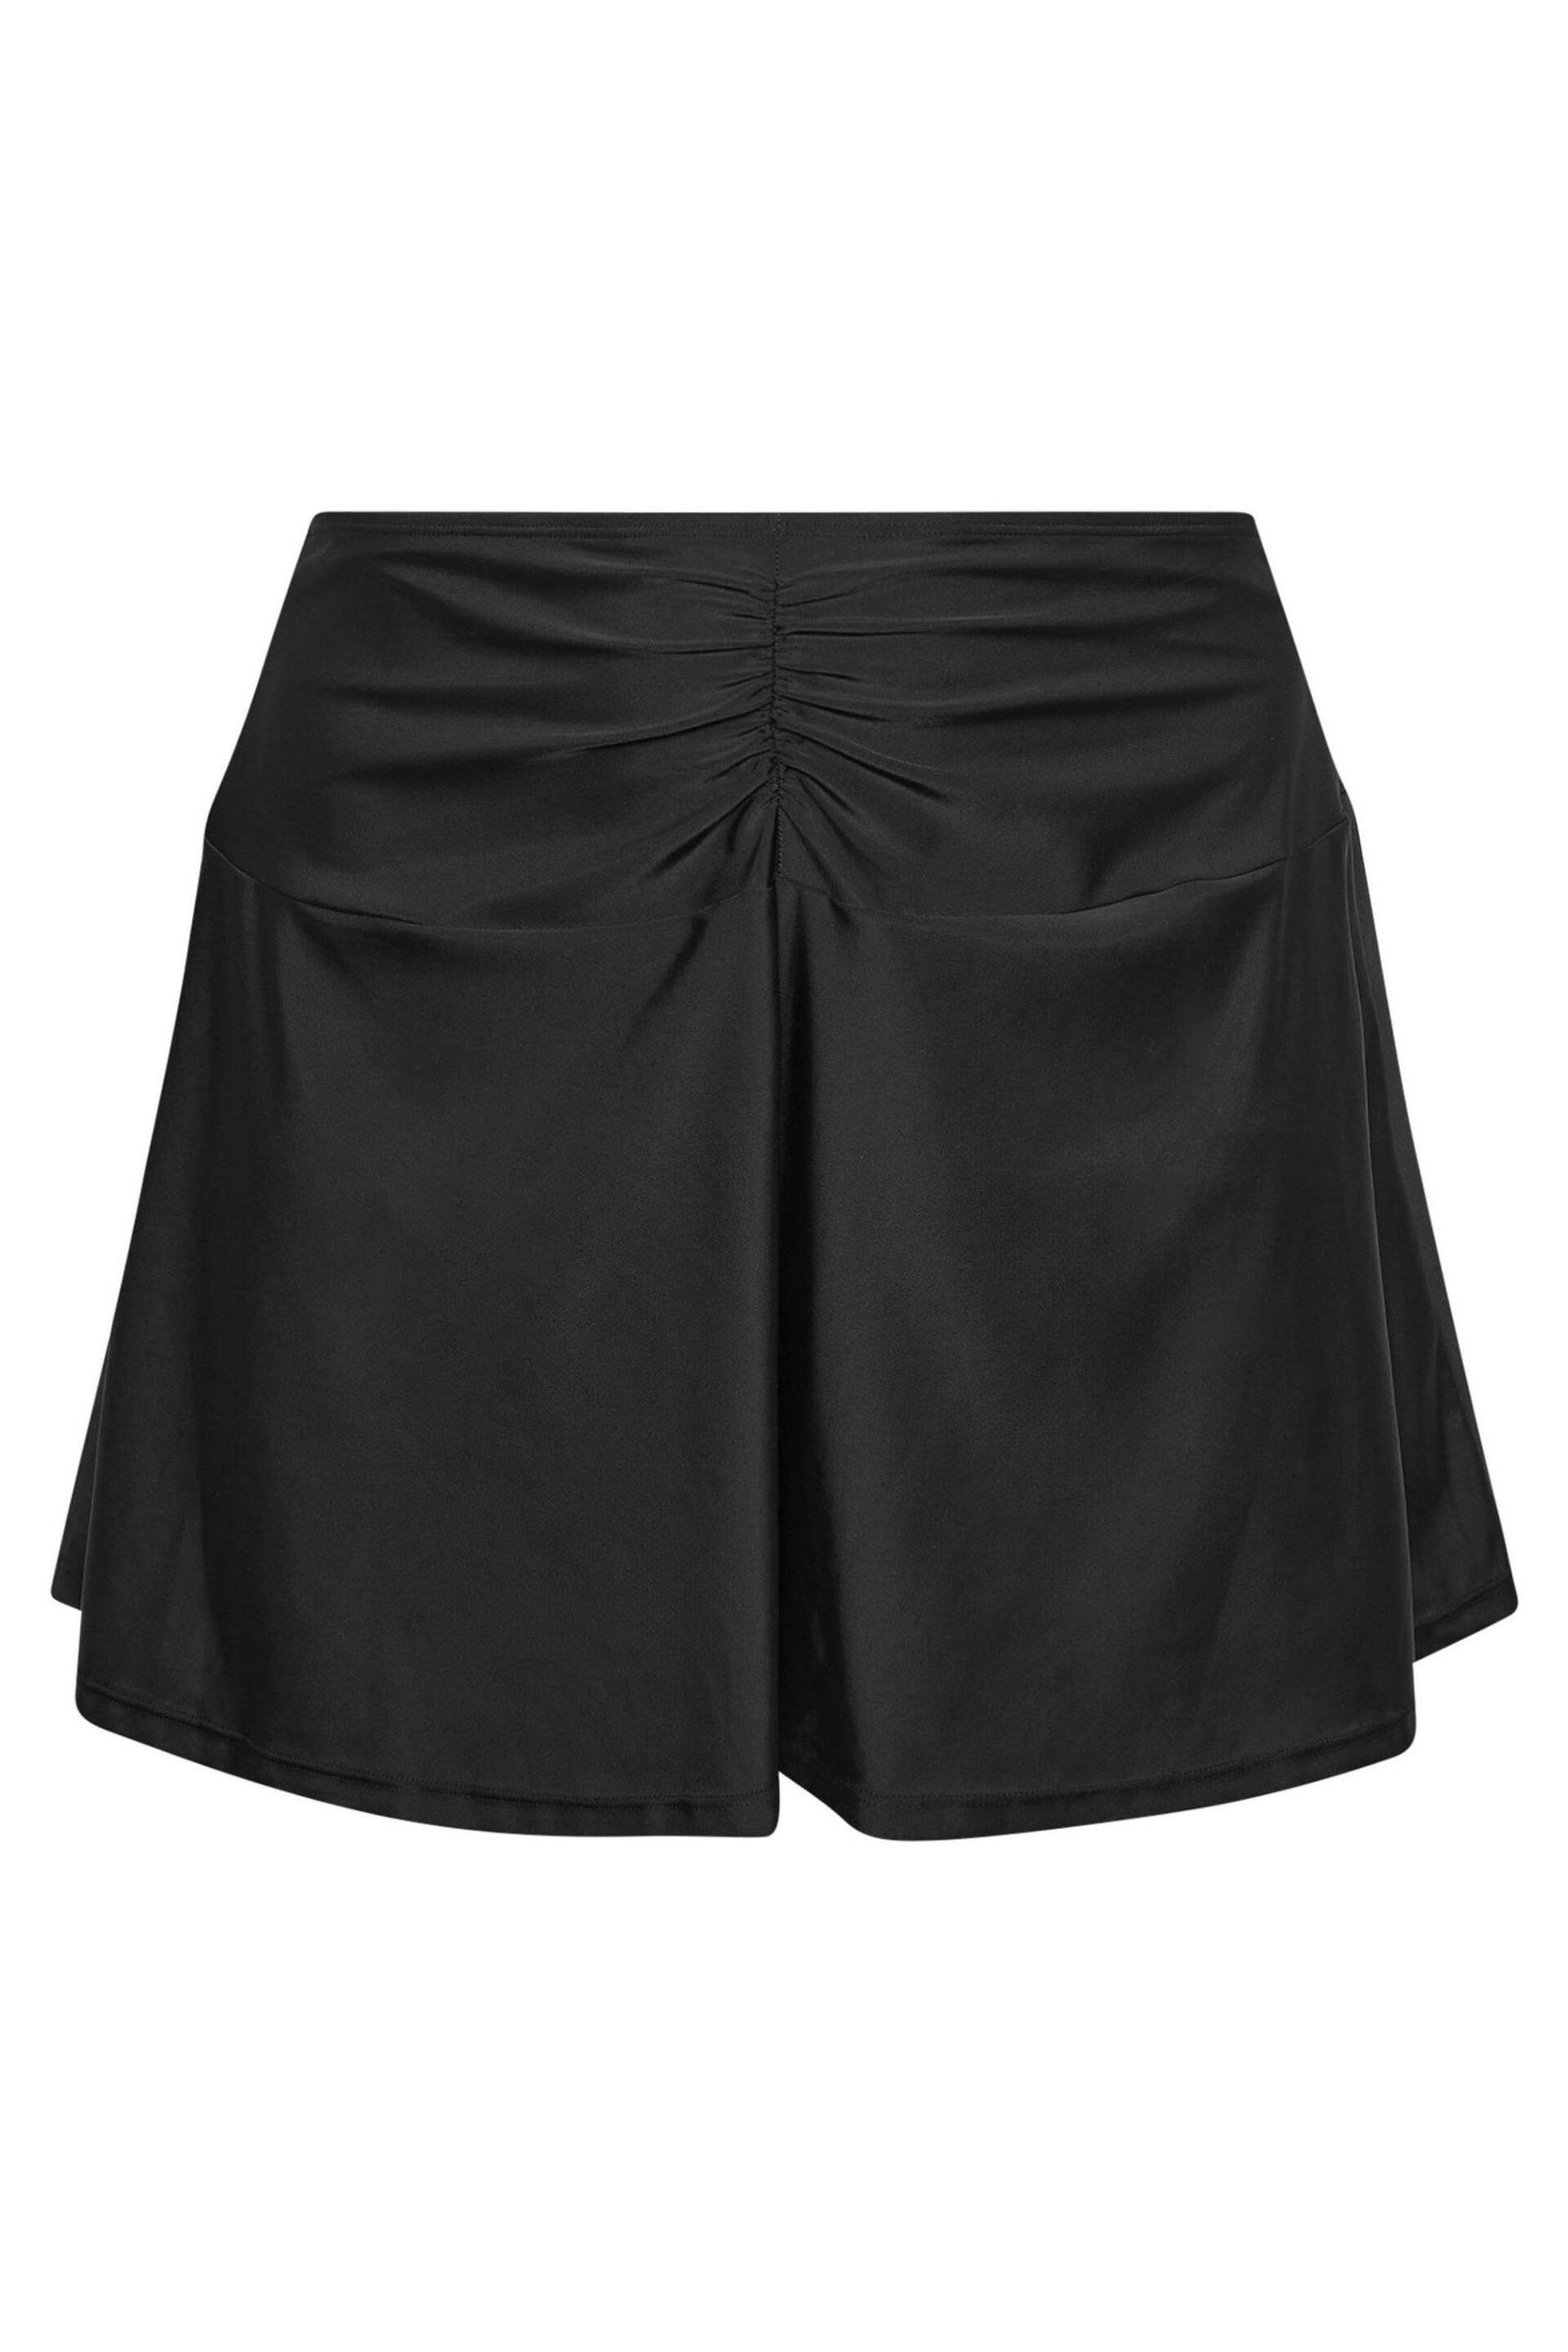 Yours Curve Black Ruched Front Swim Skirt - Image 5 of 5